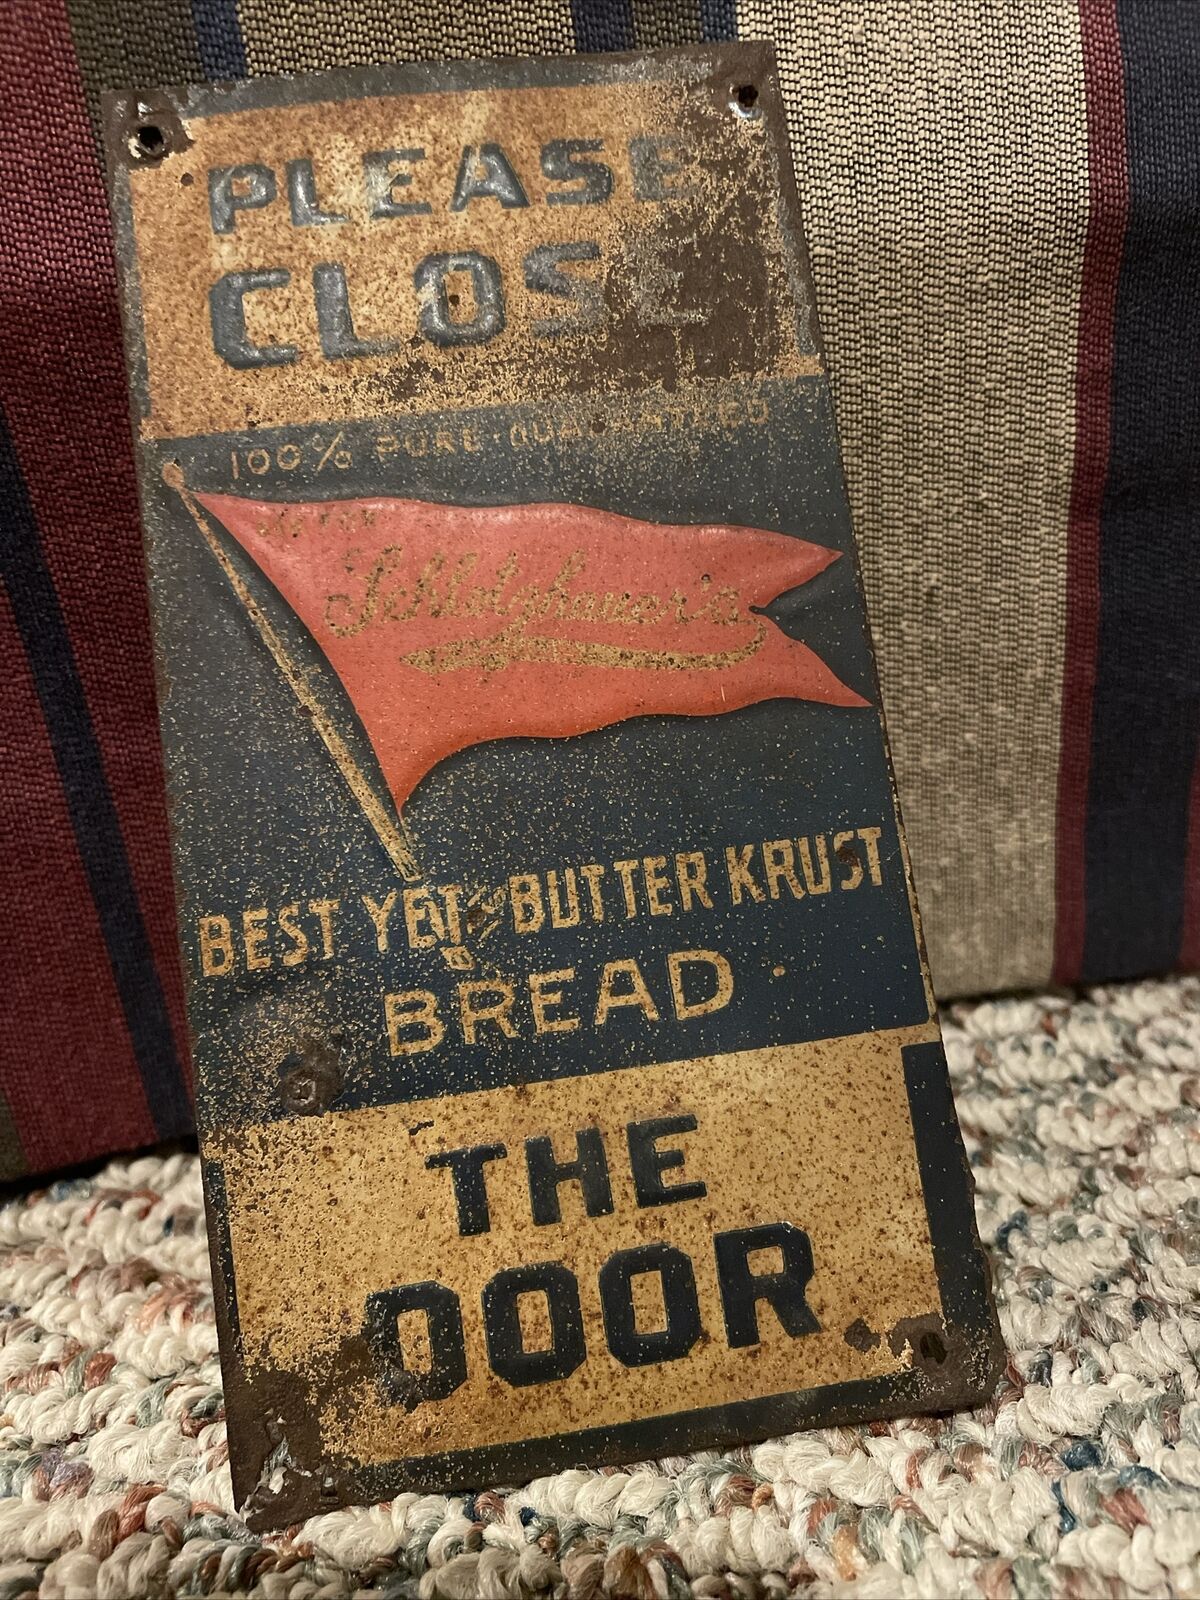 General Store Tin Embossed Door Push Sign Bread Butter Krust Old Rare Antique